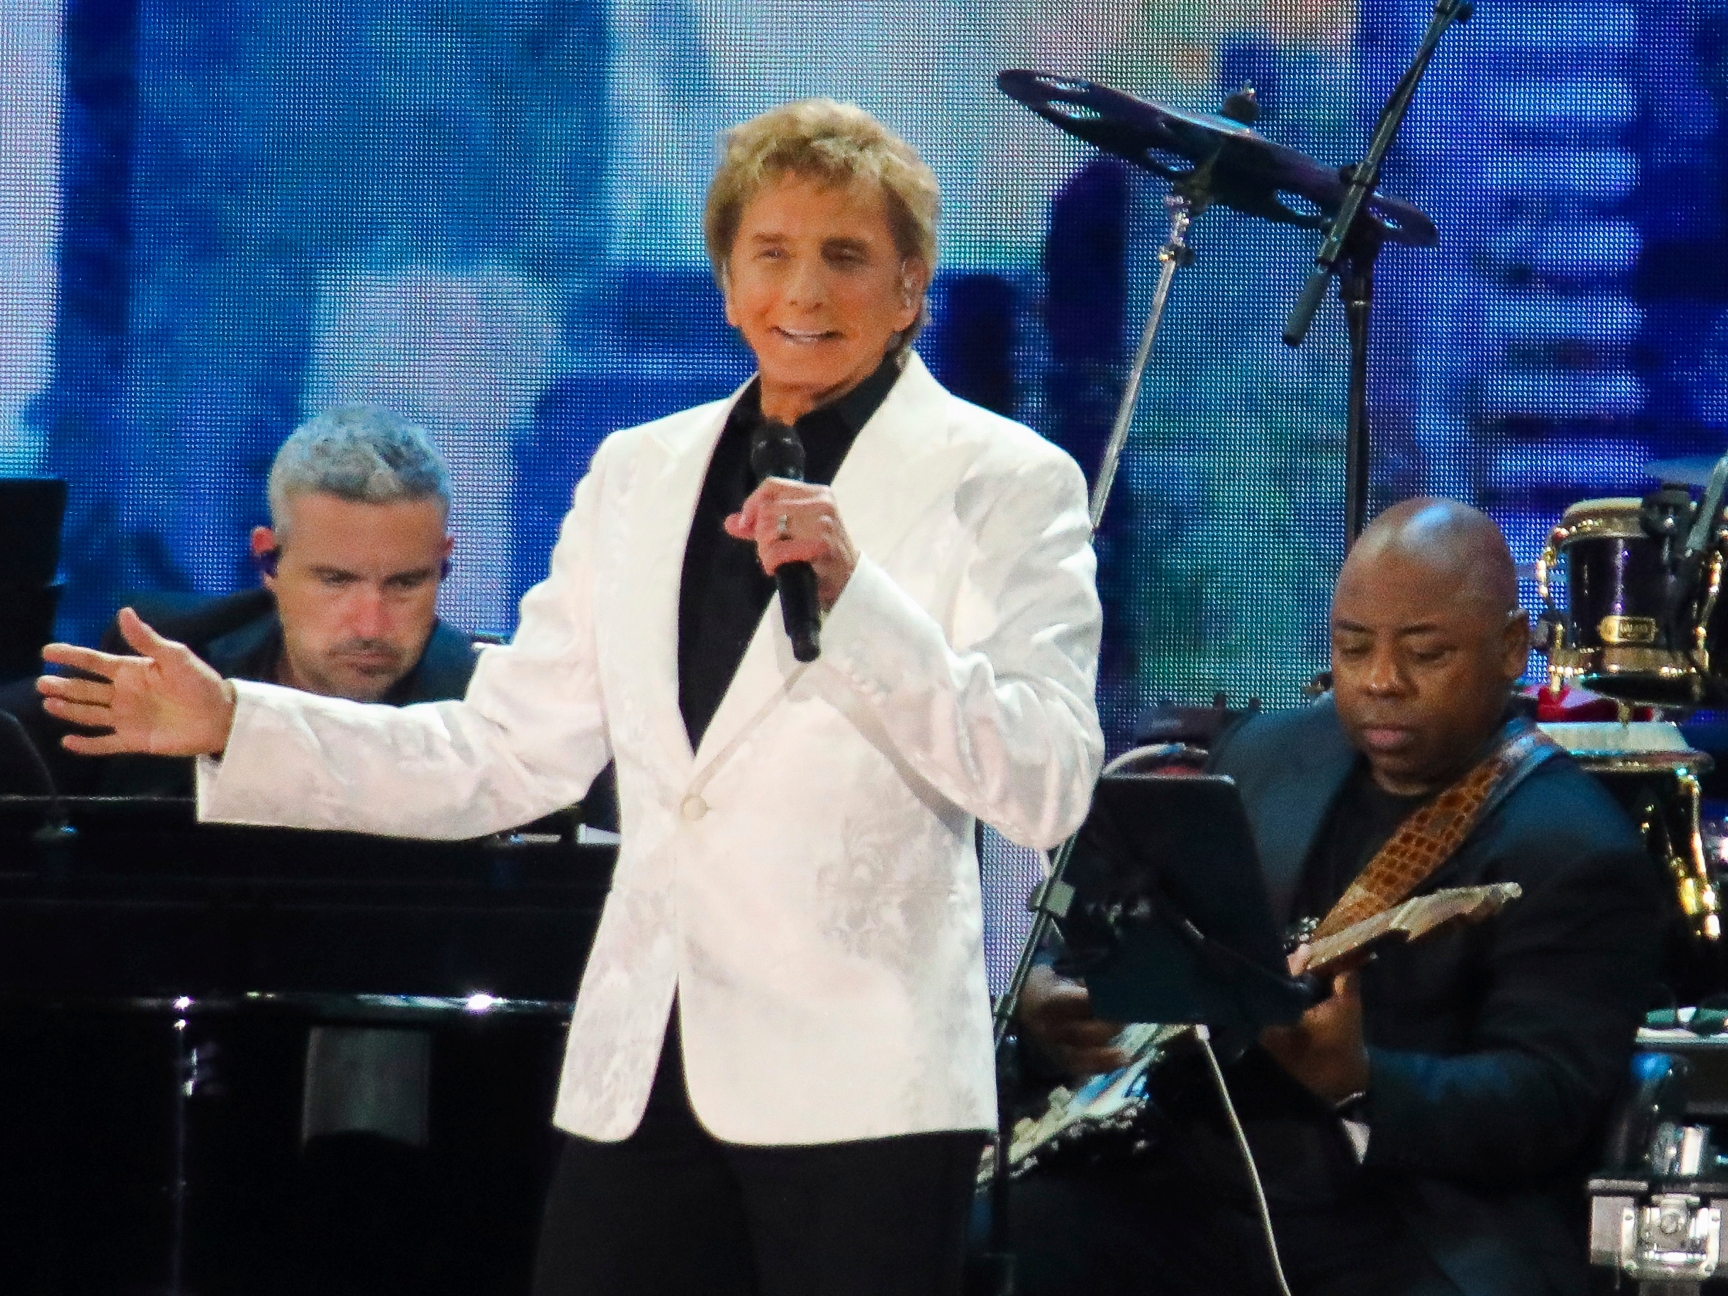 Barry Manilow tour 2022 How to buy tickets, schedule, dates